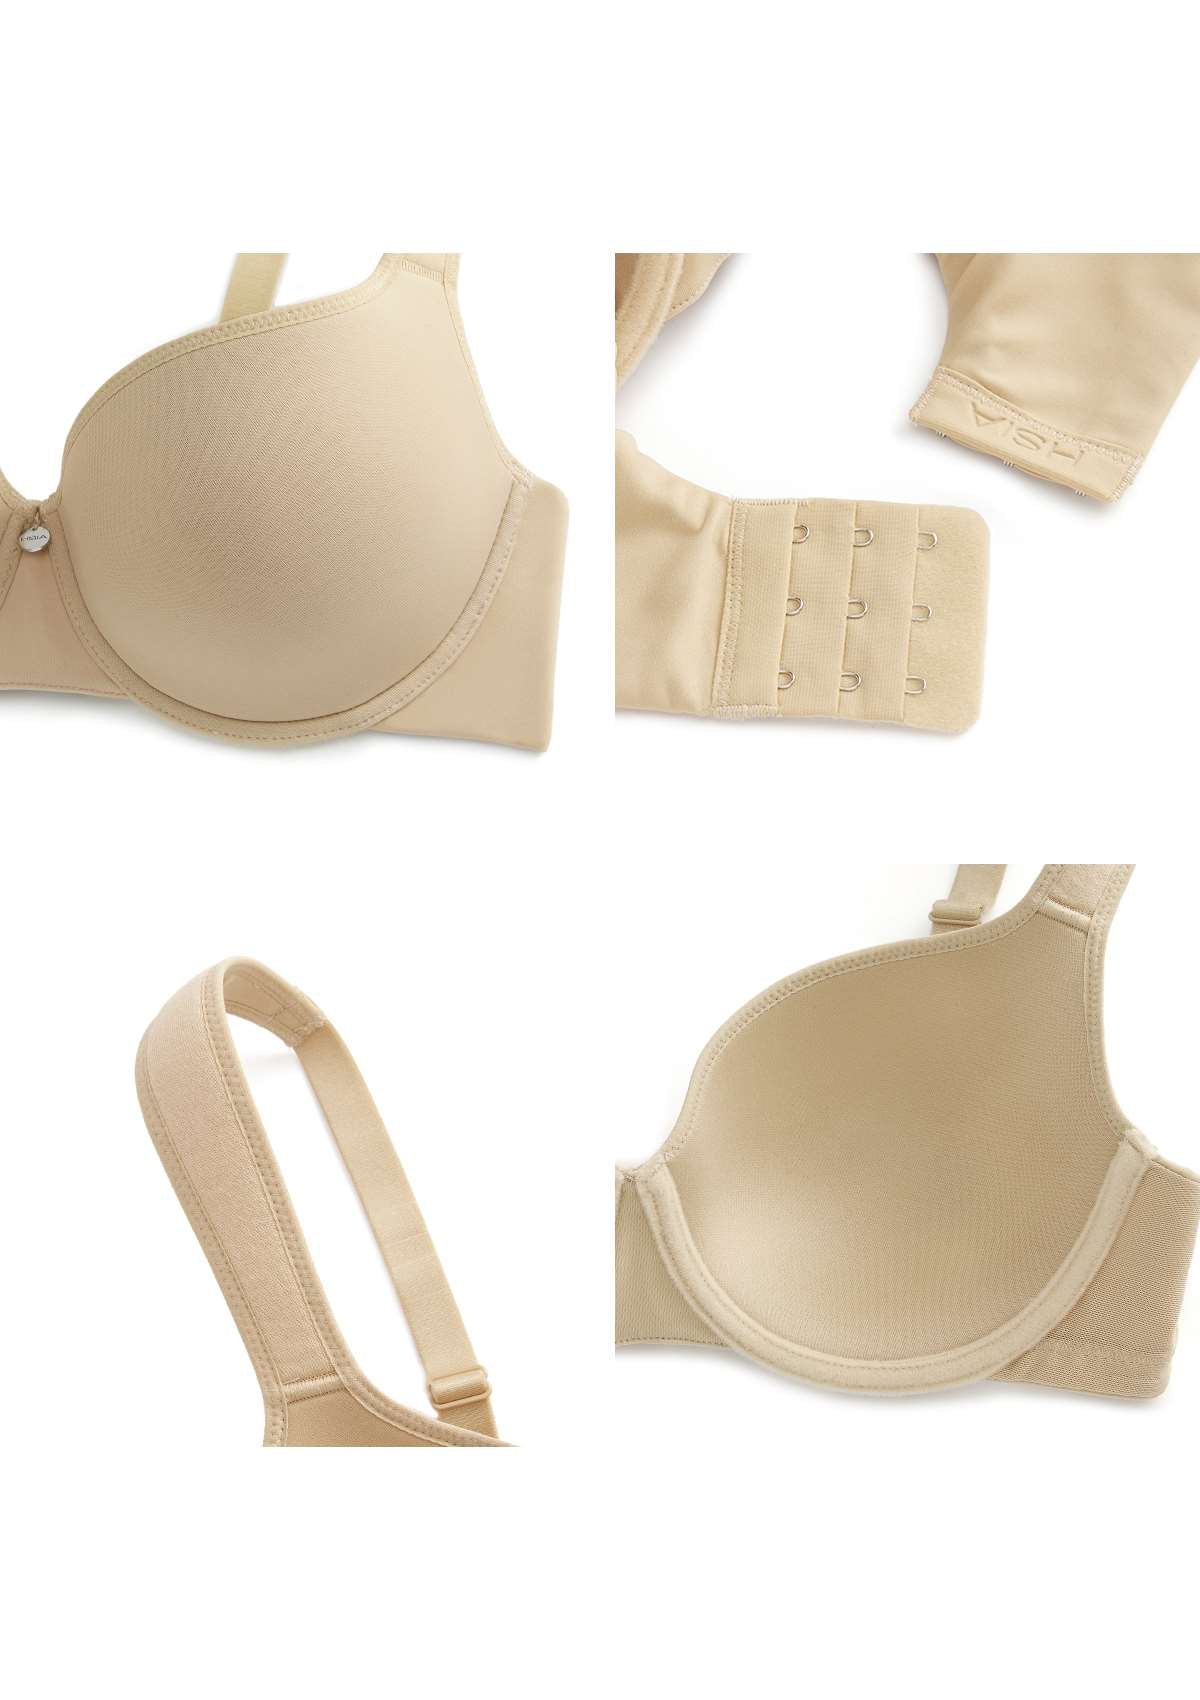 HSIA Patricia Seamless Lightly Padded Minimizer Bra -for Bigger Busts - Beige / 46 / DD/E